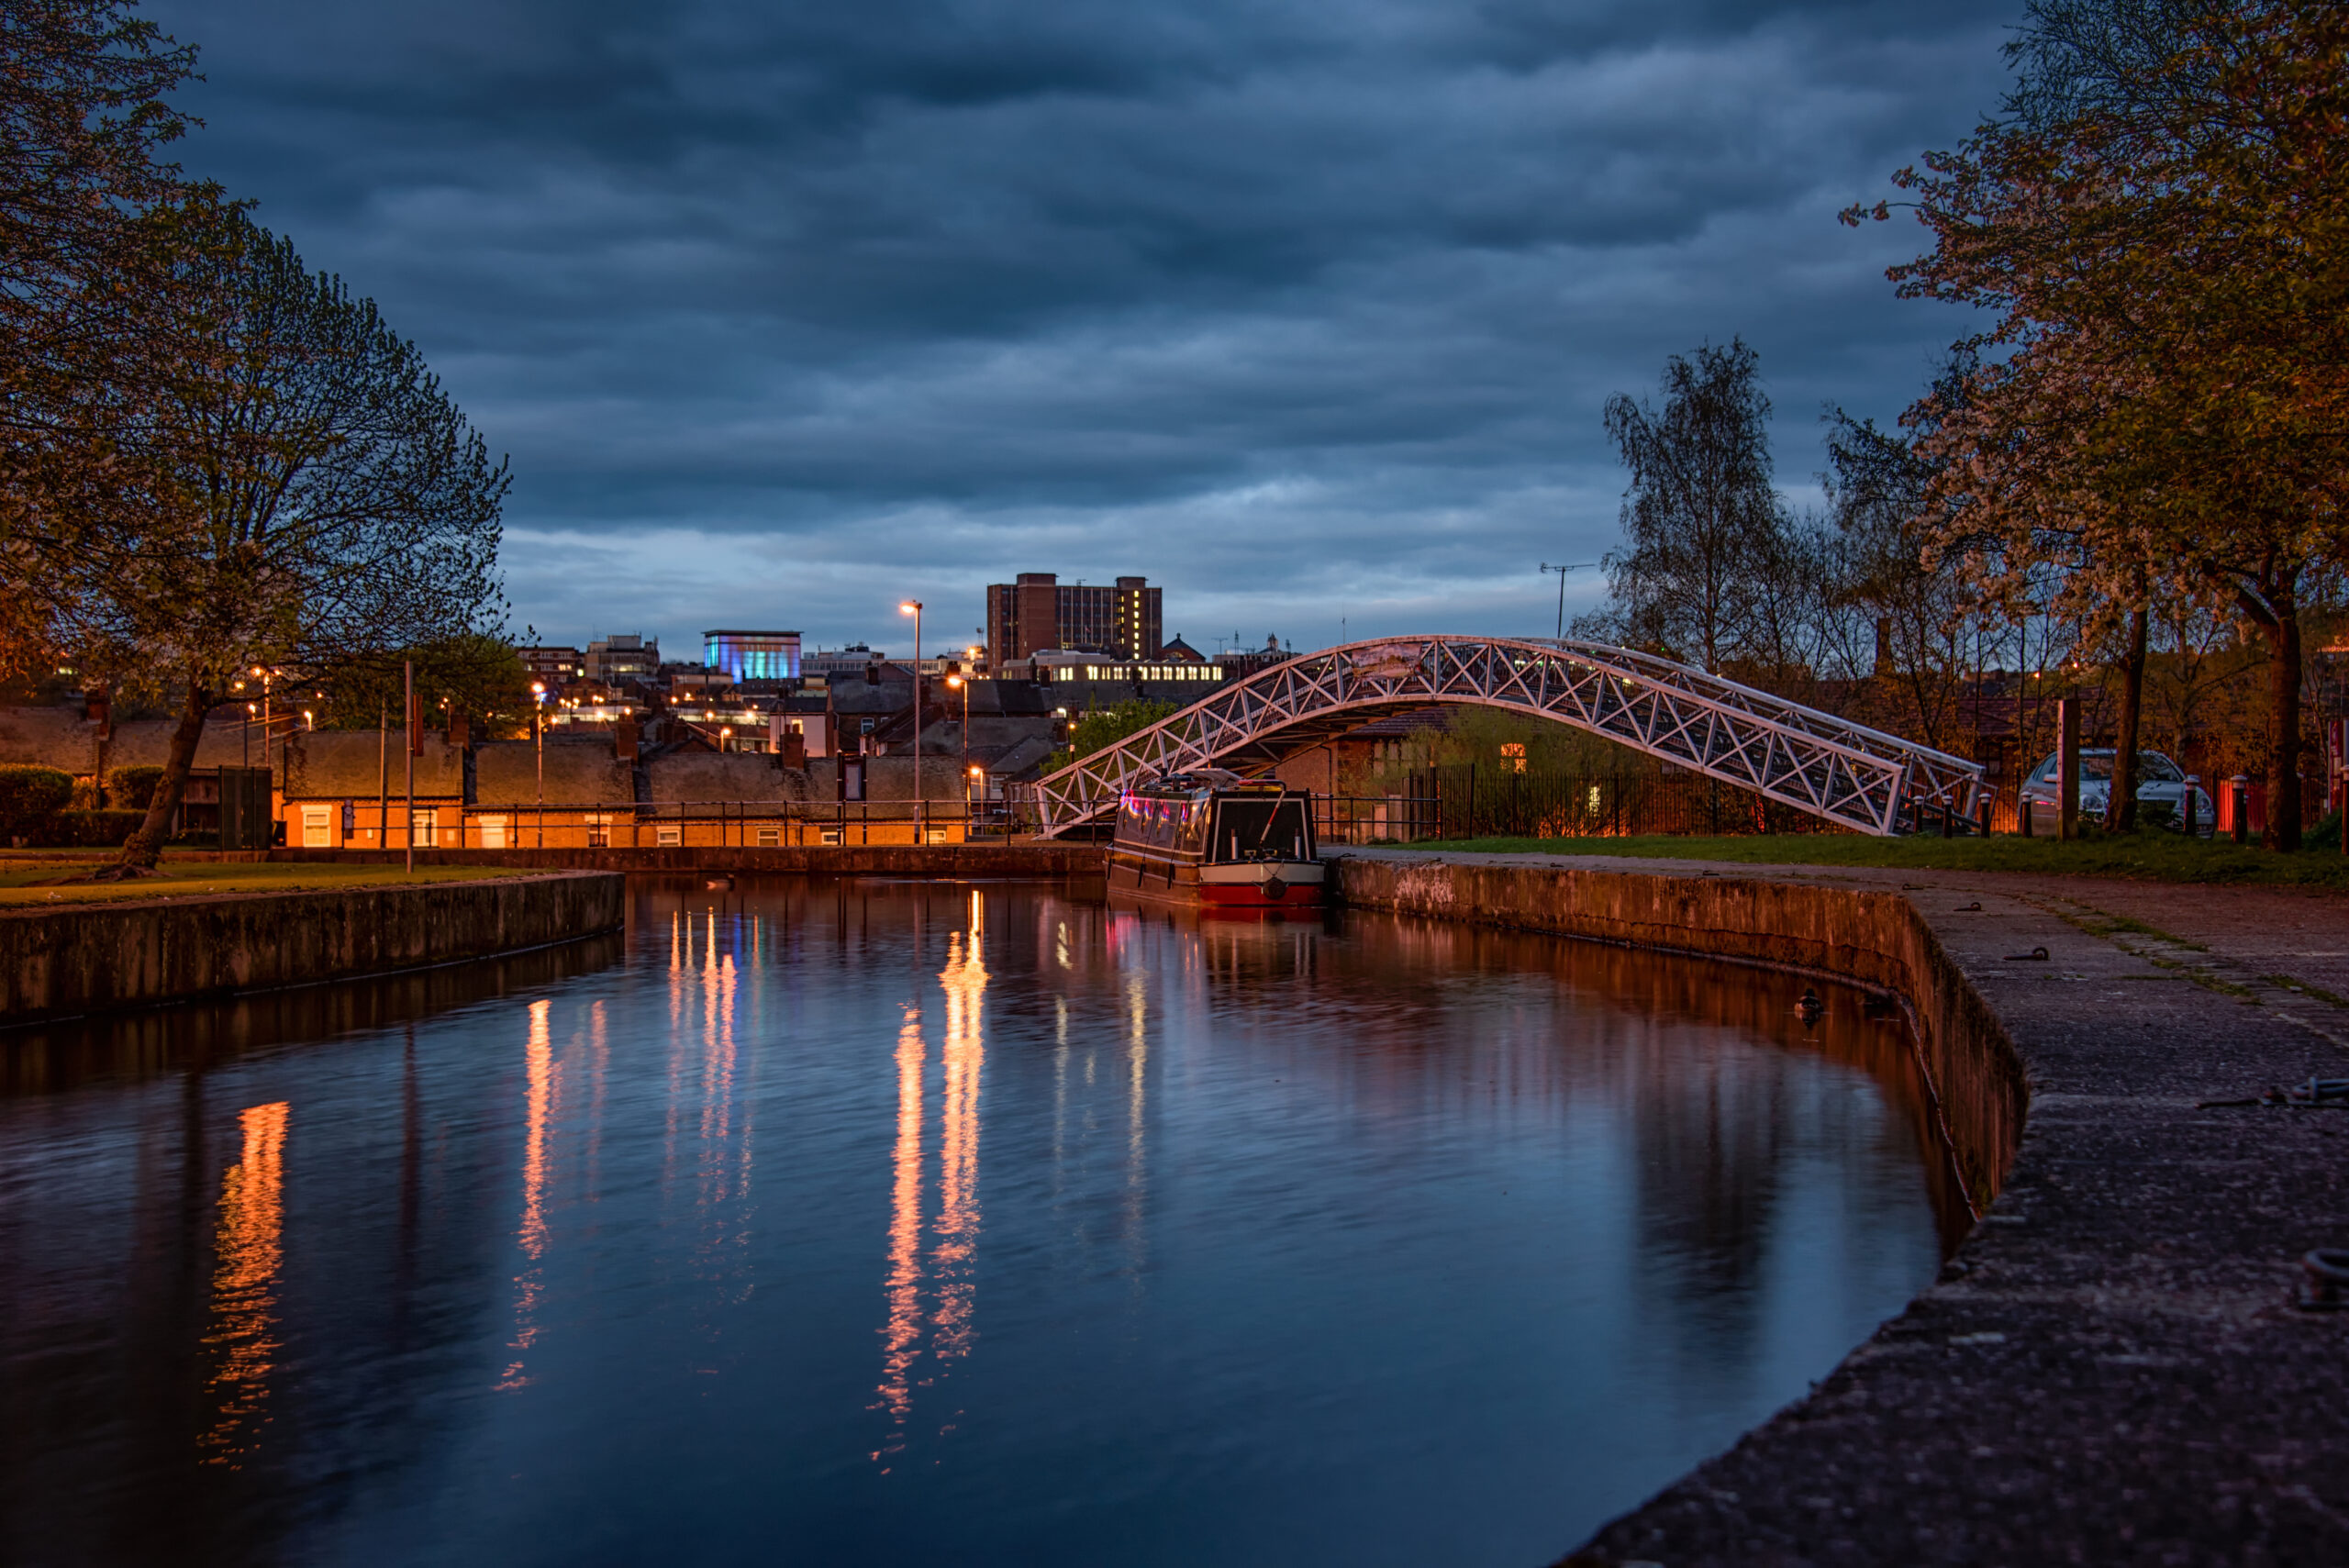 A night shot of the cauldon canal with a bridge crossing at Etru